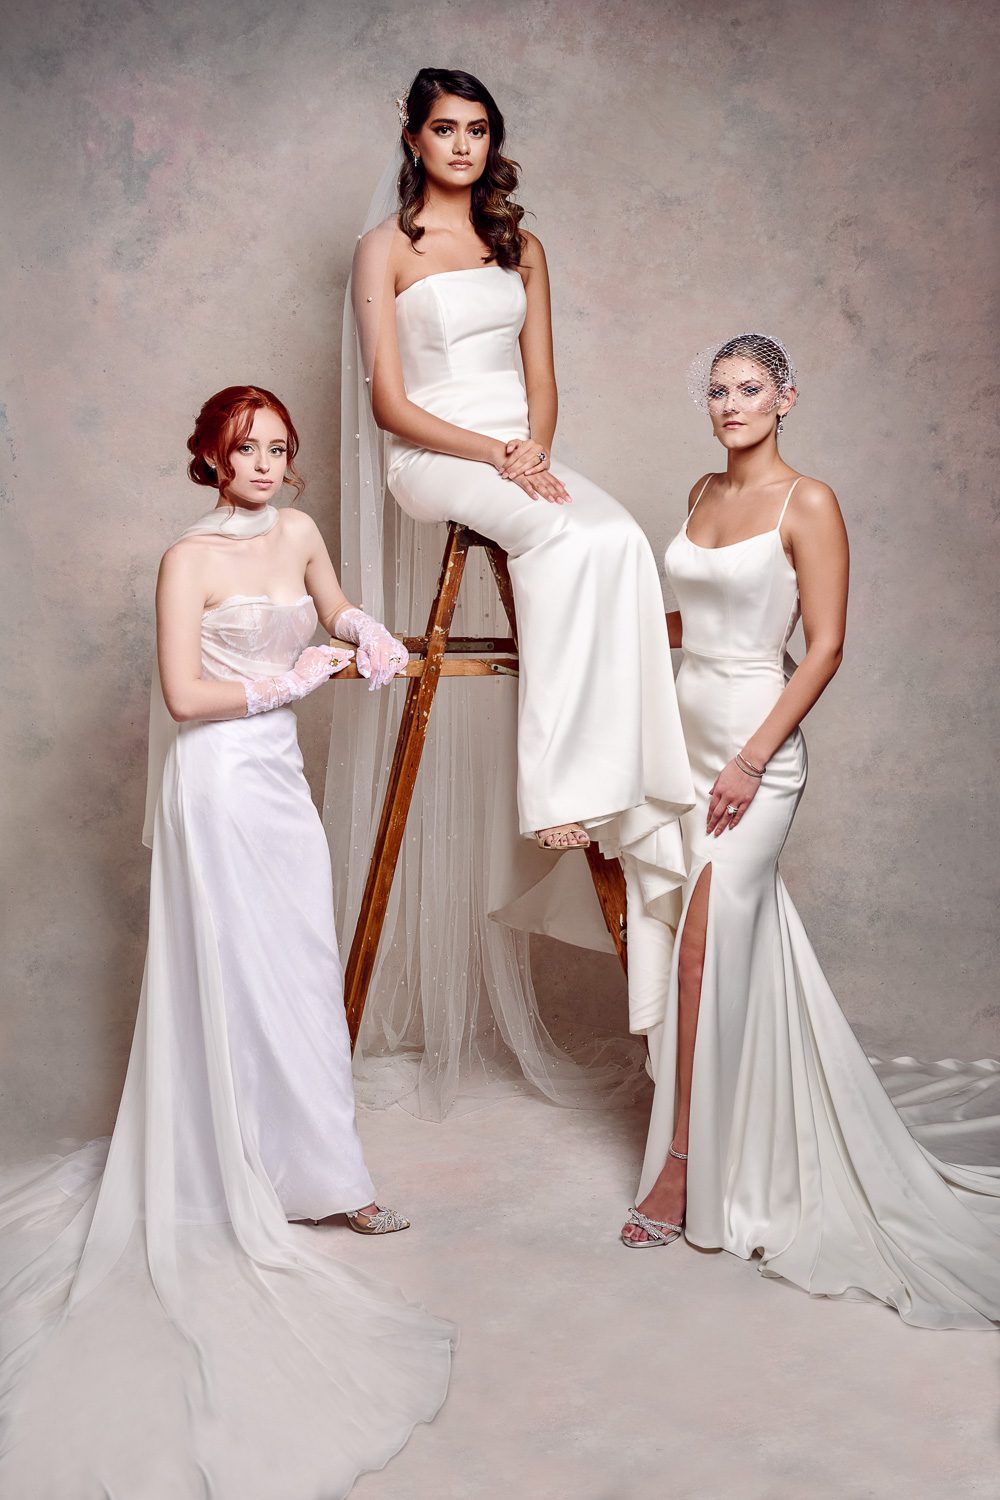 Three models wearing wedding dresses pose on ladder with painted canvas backdrop